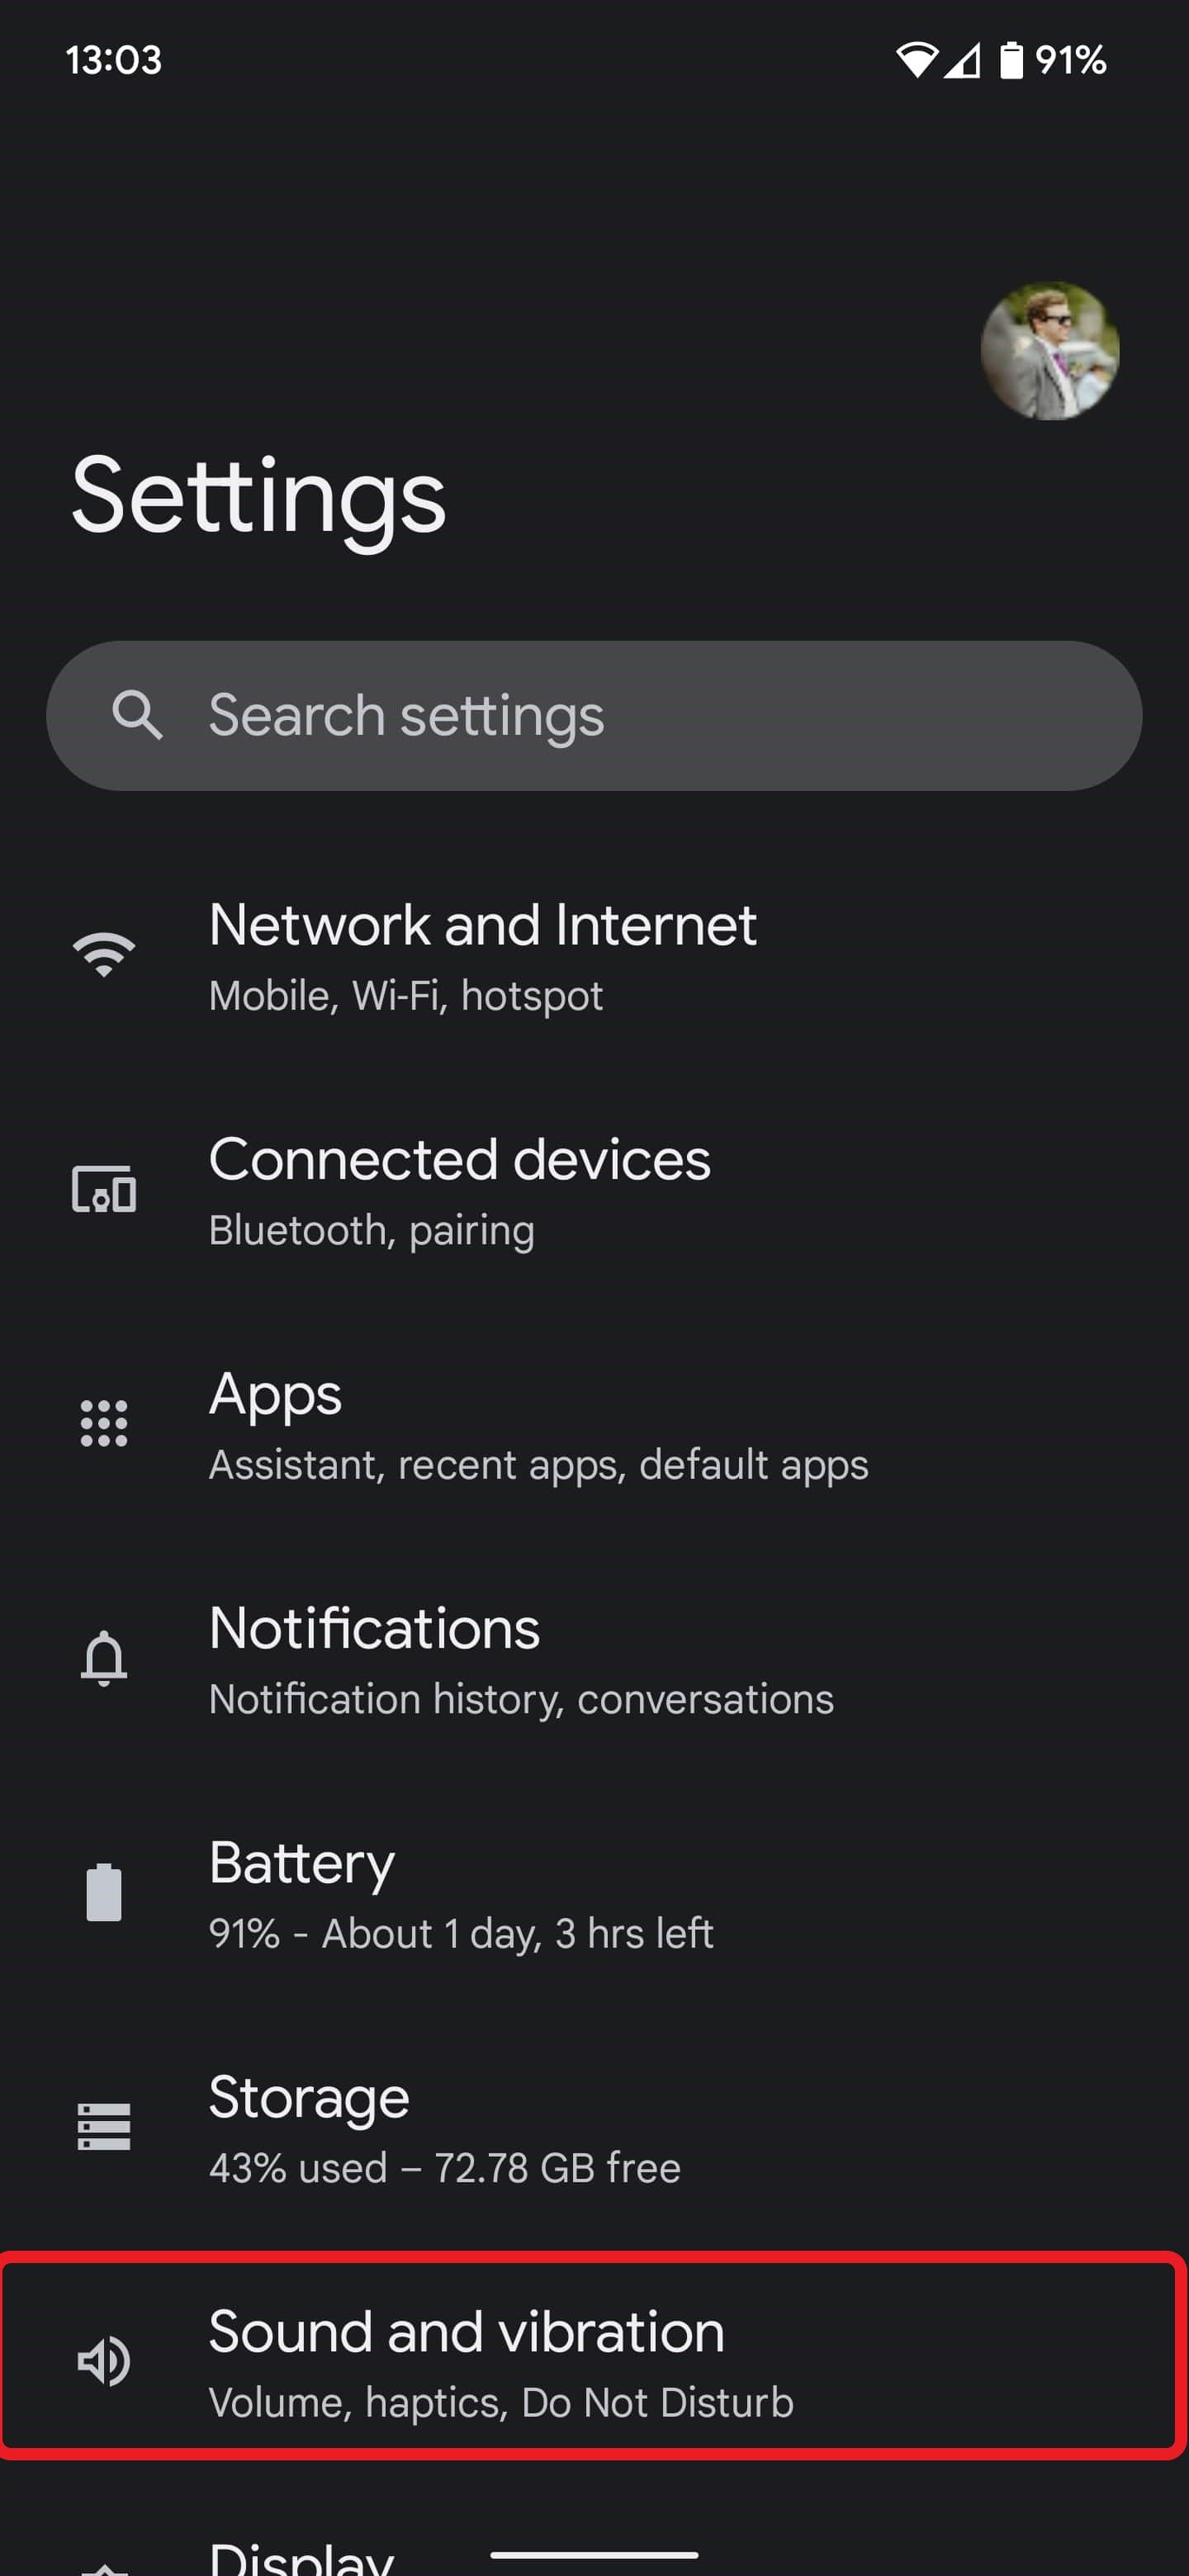 The Google Pixel Settings app with the Sound and vibration option highlighted with a red box around it